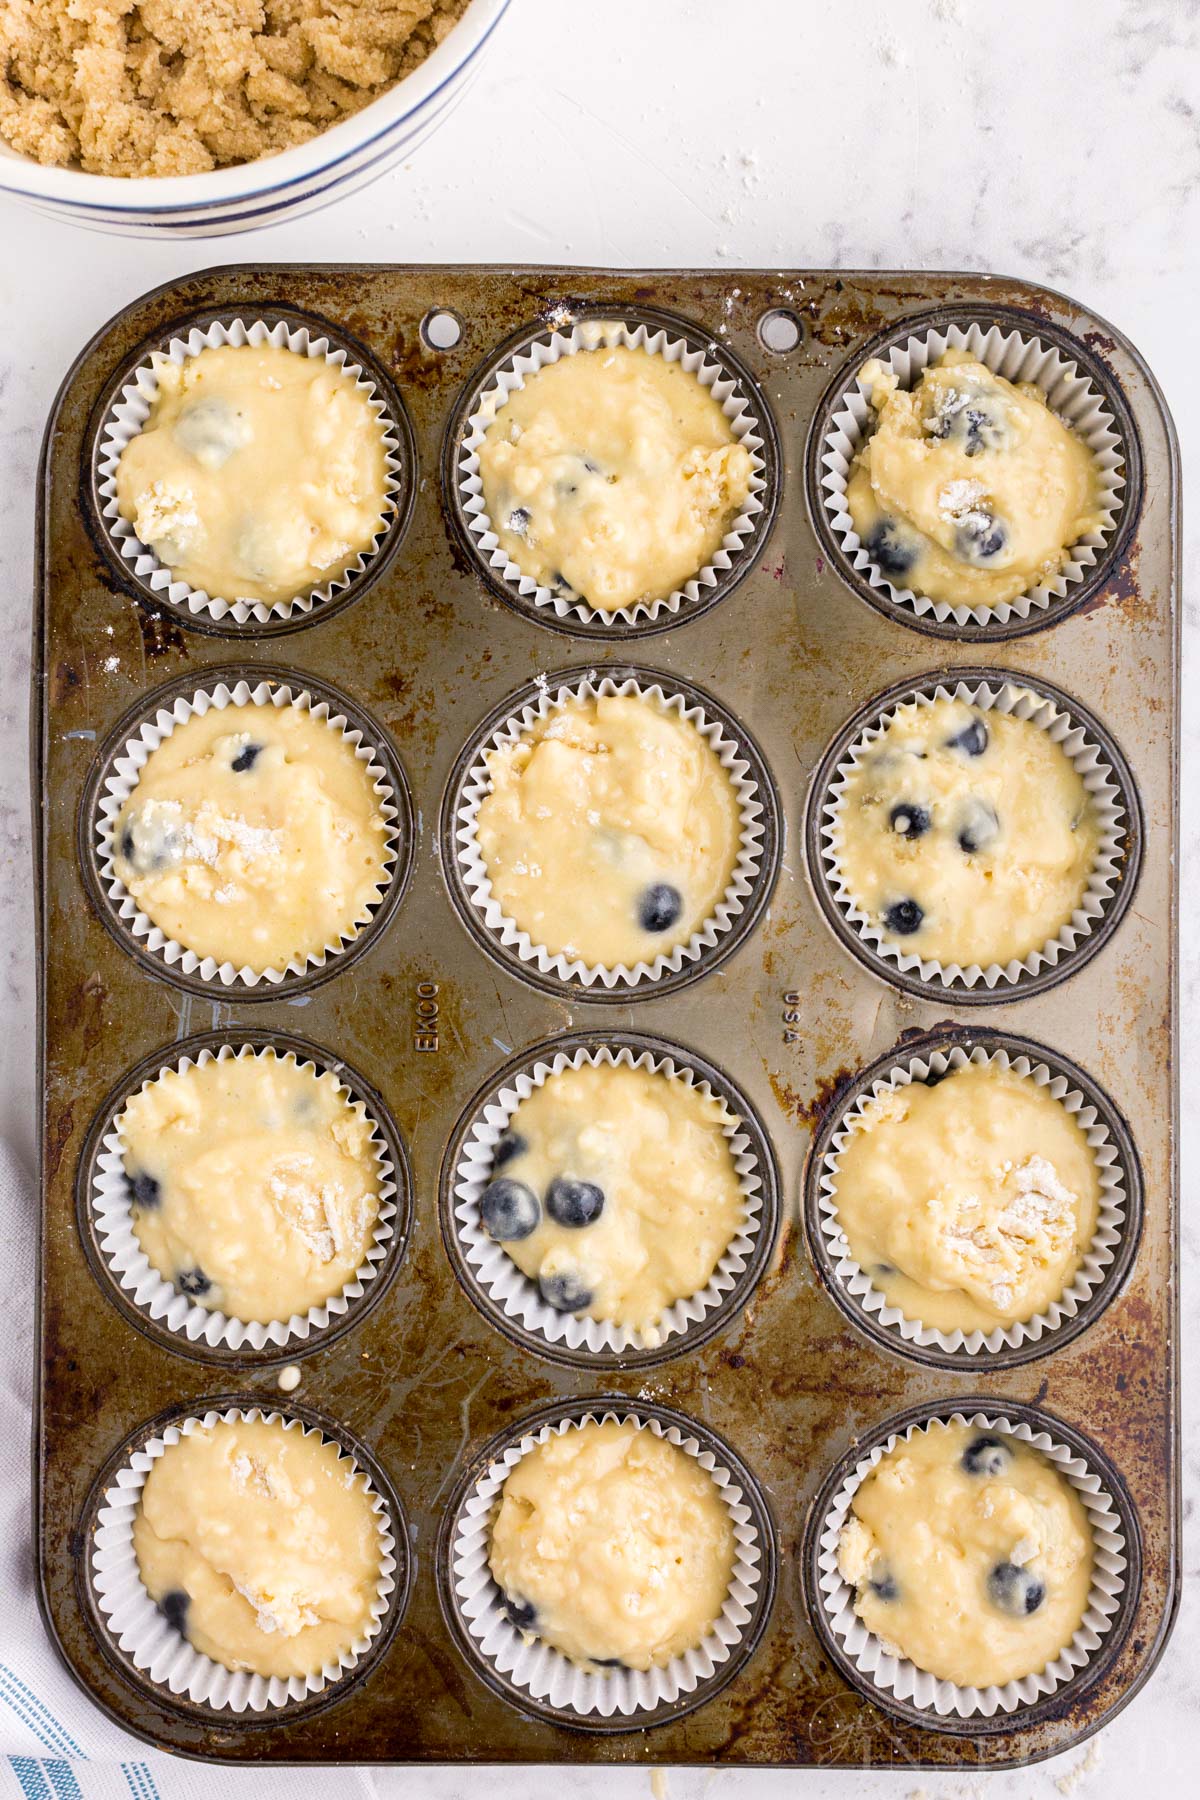 Sourdough Blueberry Muffins in a lined muffin tin before baking.